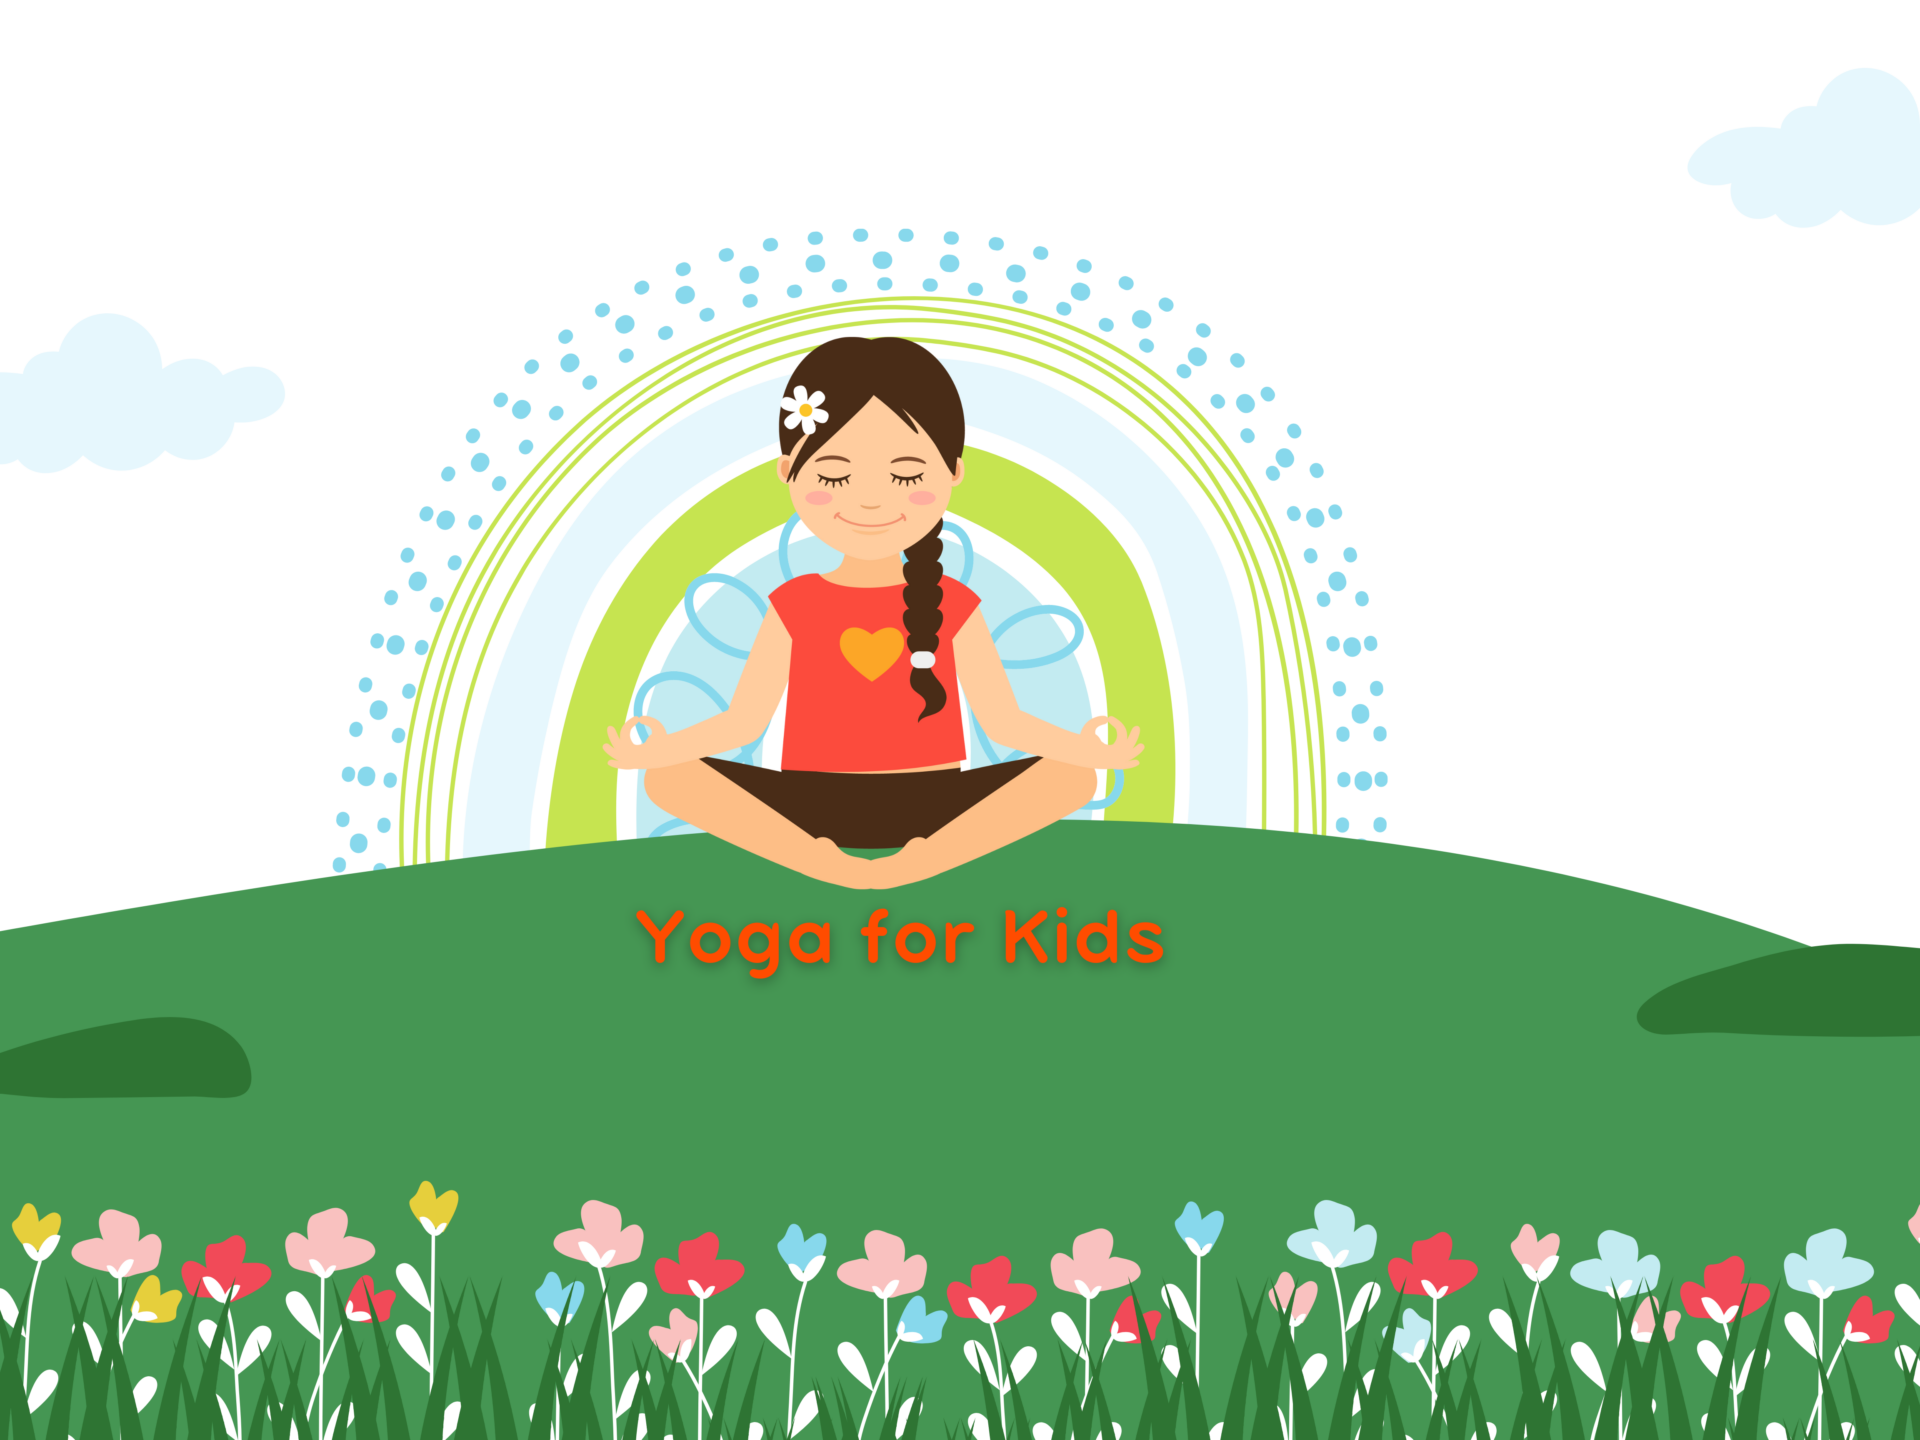 Image of Yoga for kids event